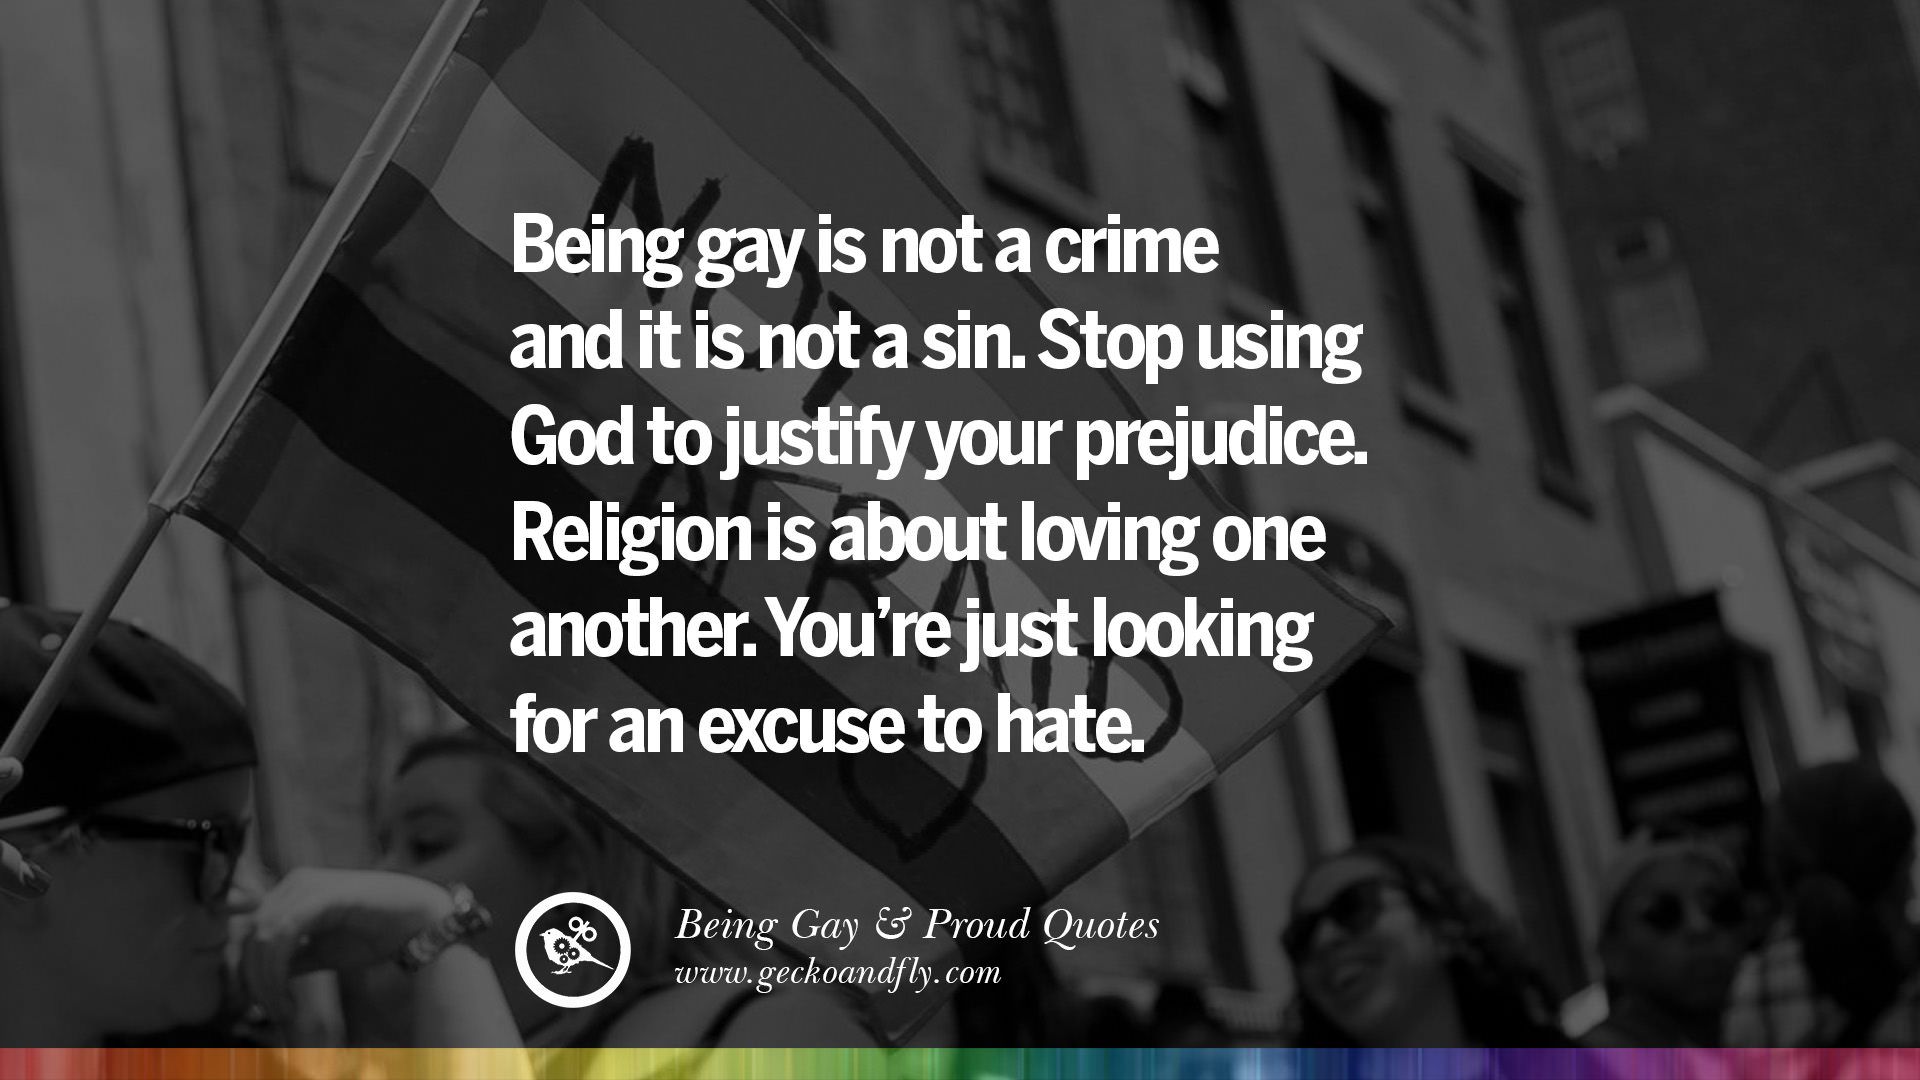 Quotes About Gay Pride, Pro LGBT, Homophobia and Marriage